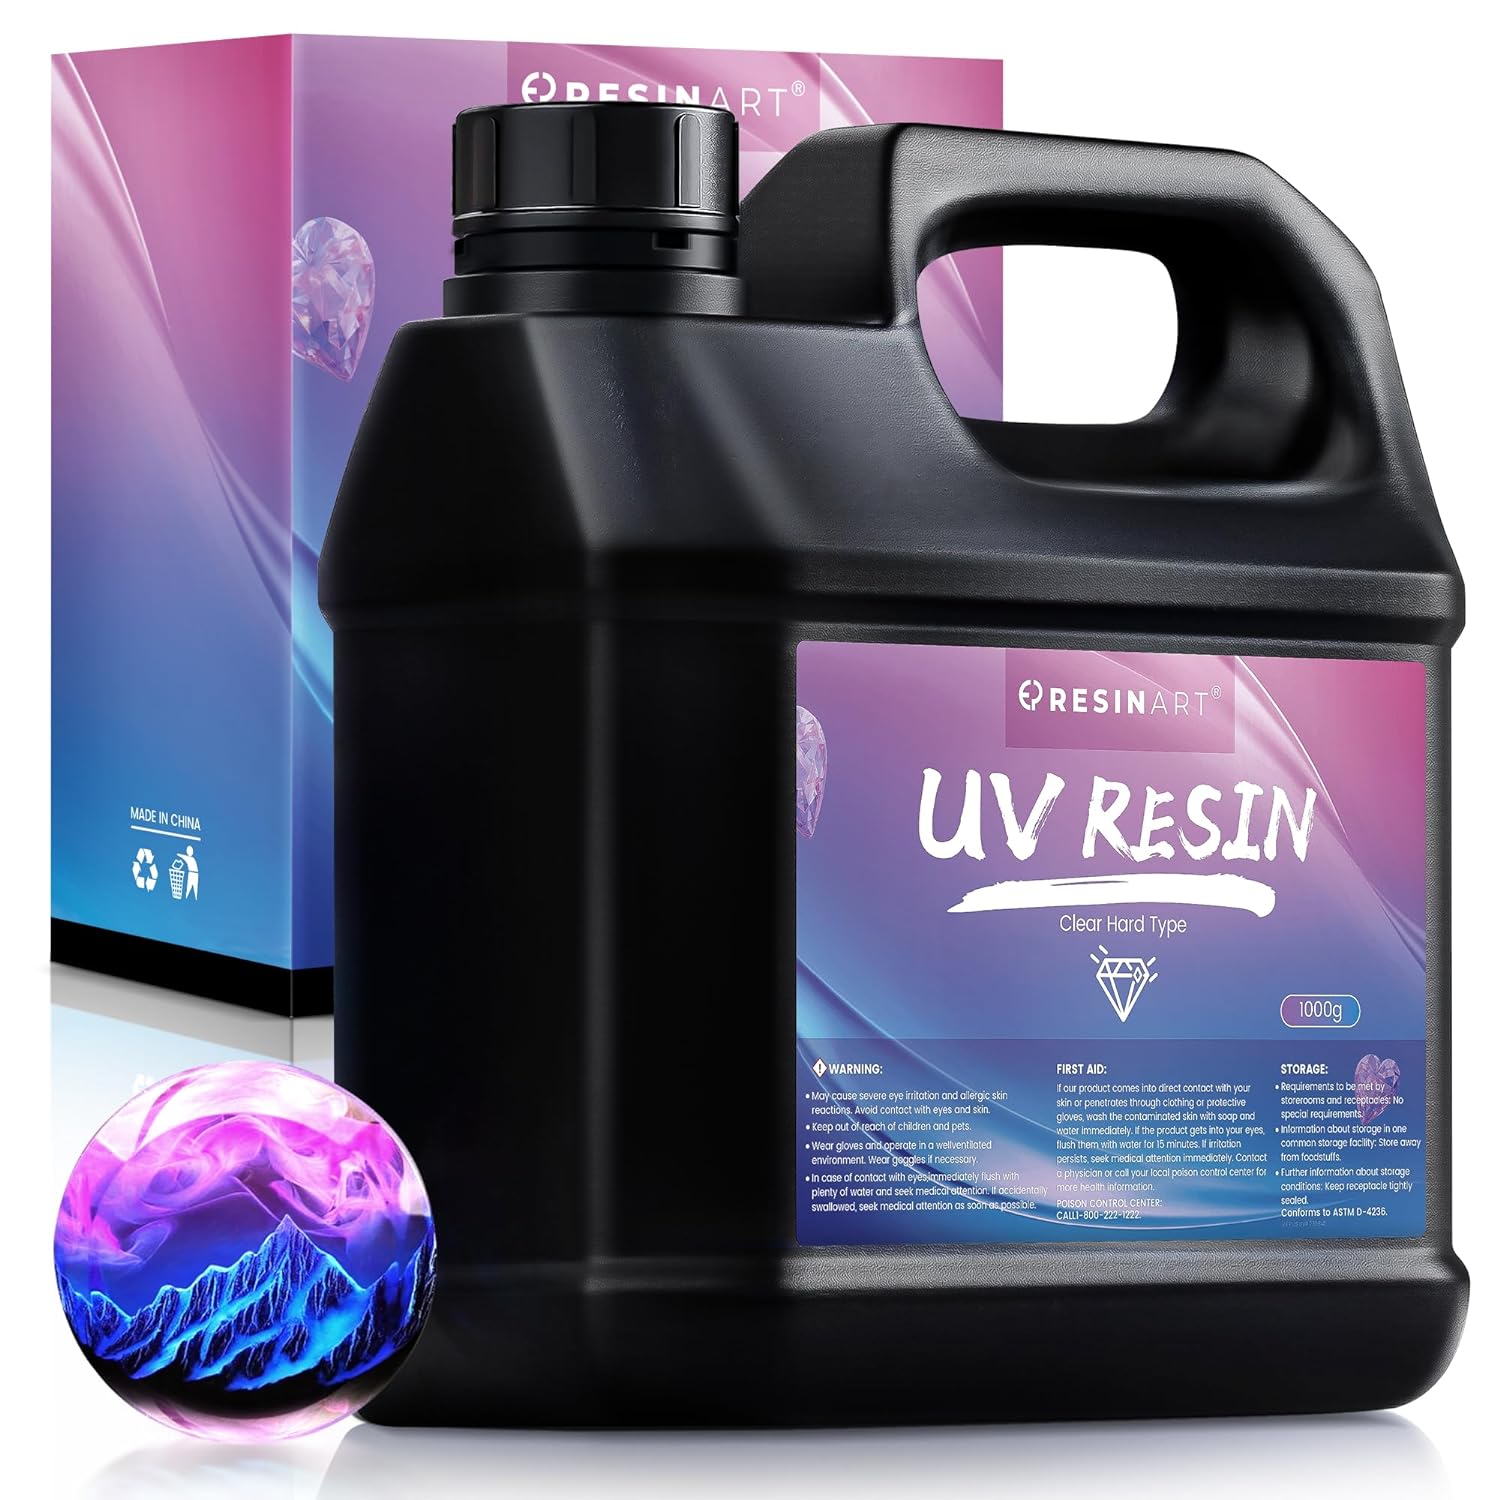 YIEHO UV Resin Kit-200g Upgraded Crystal Clear Hard UV Curing Epoxy Resin Starter Supplies for Craft Jewelry Making